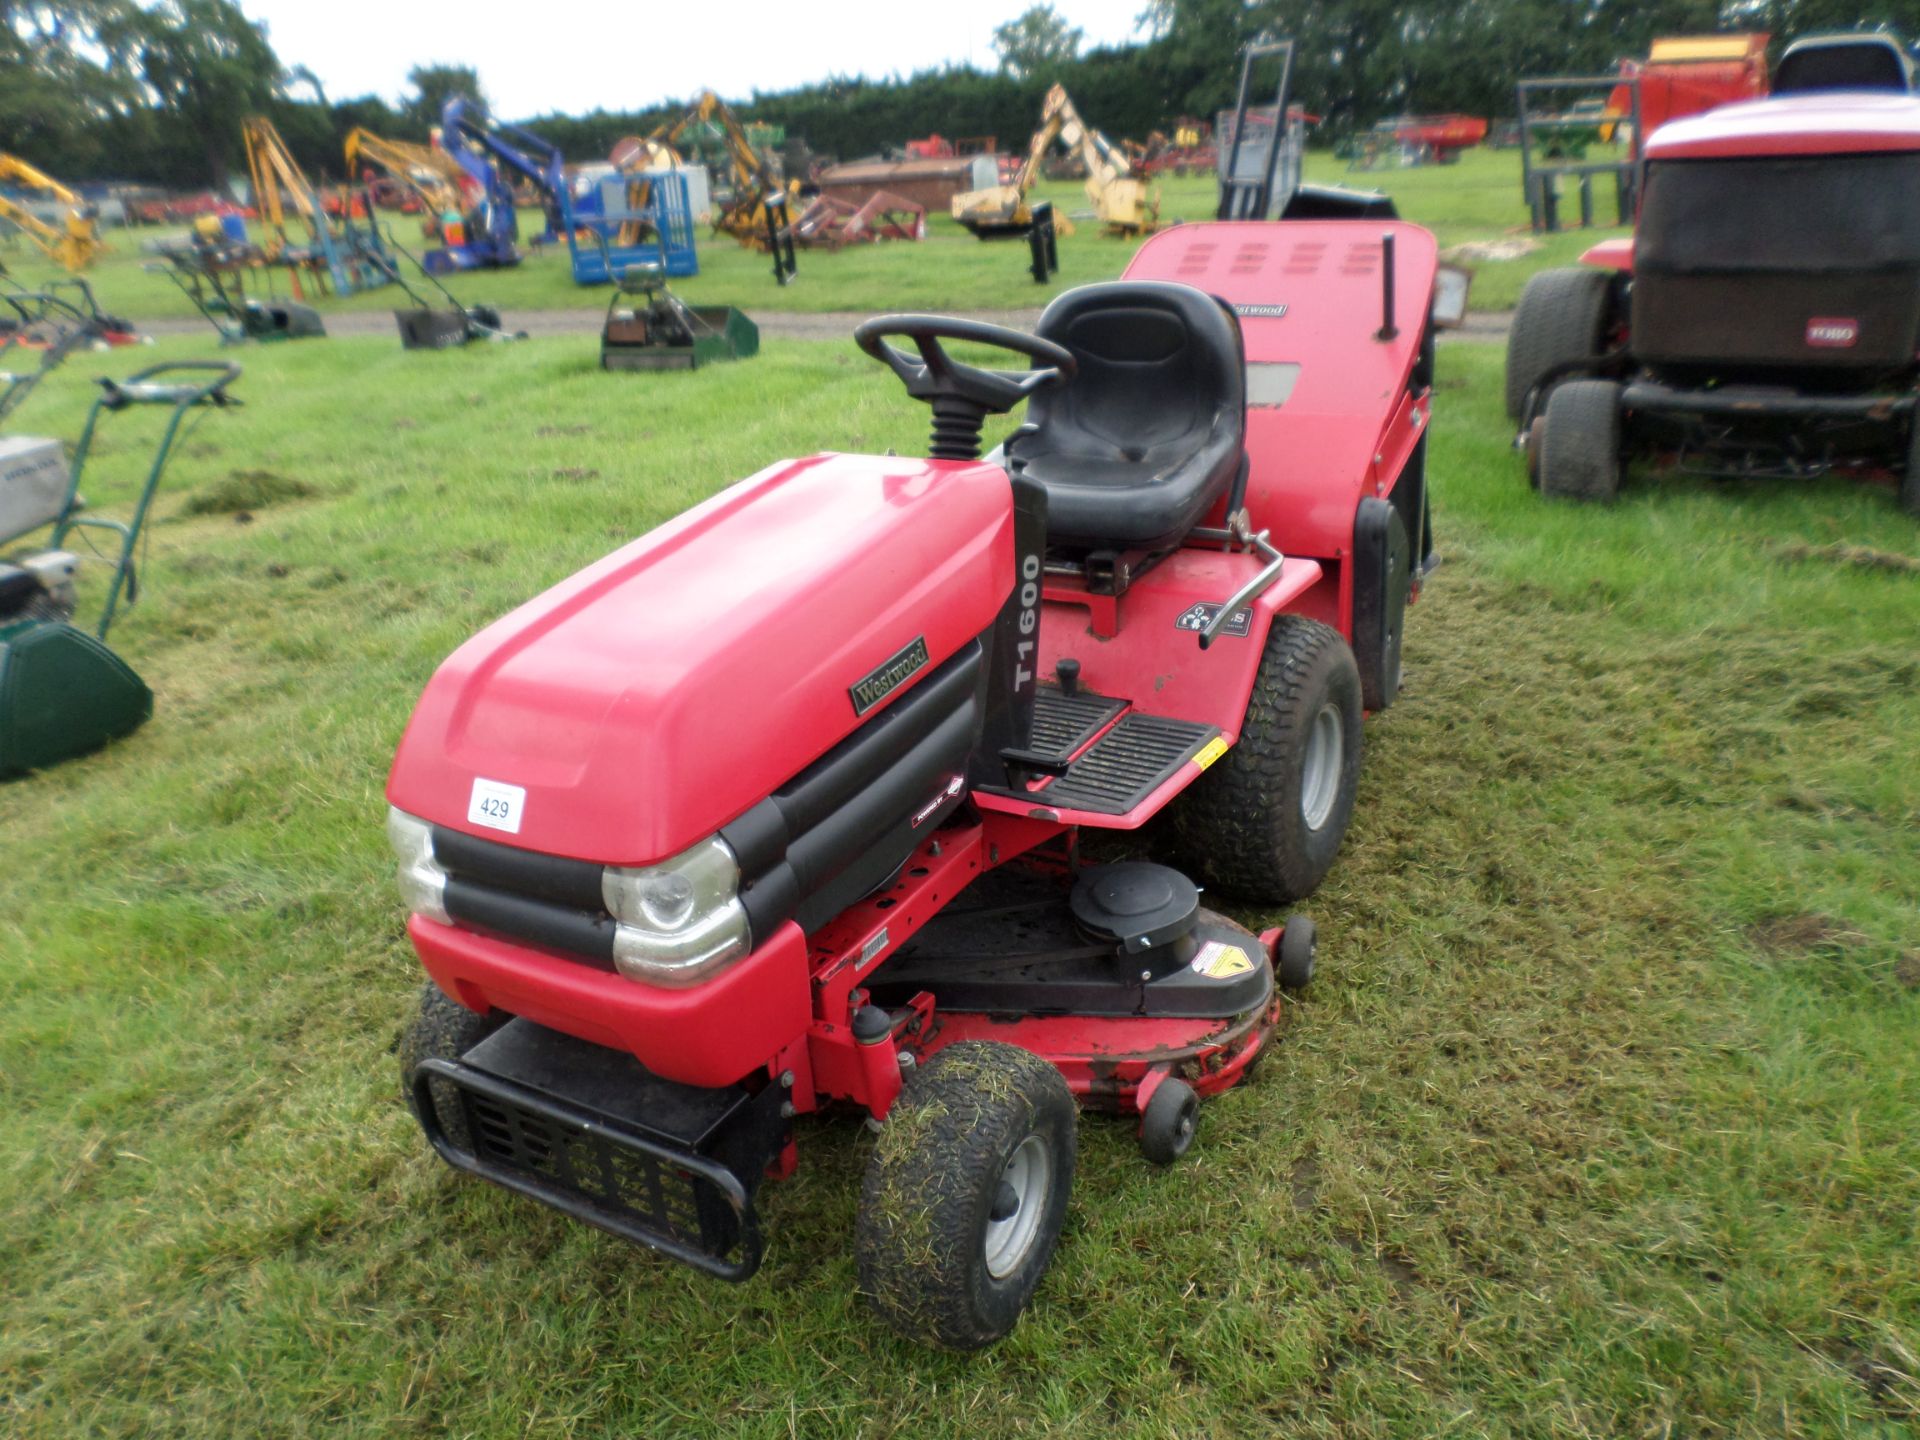 Westwood T1600 ride on mower part exchange machine used this season but not serviced, owers manual &